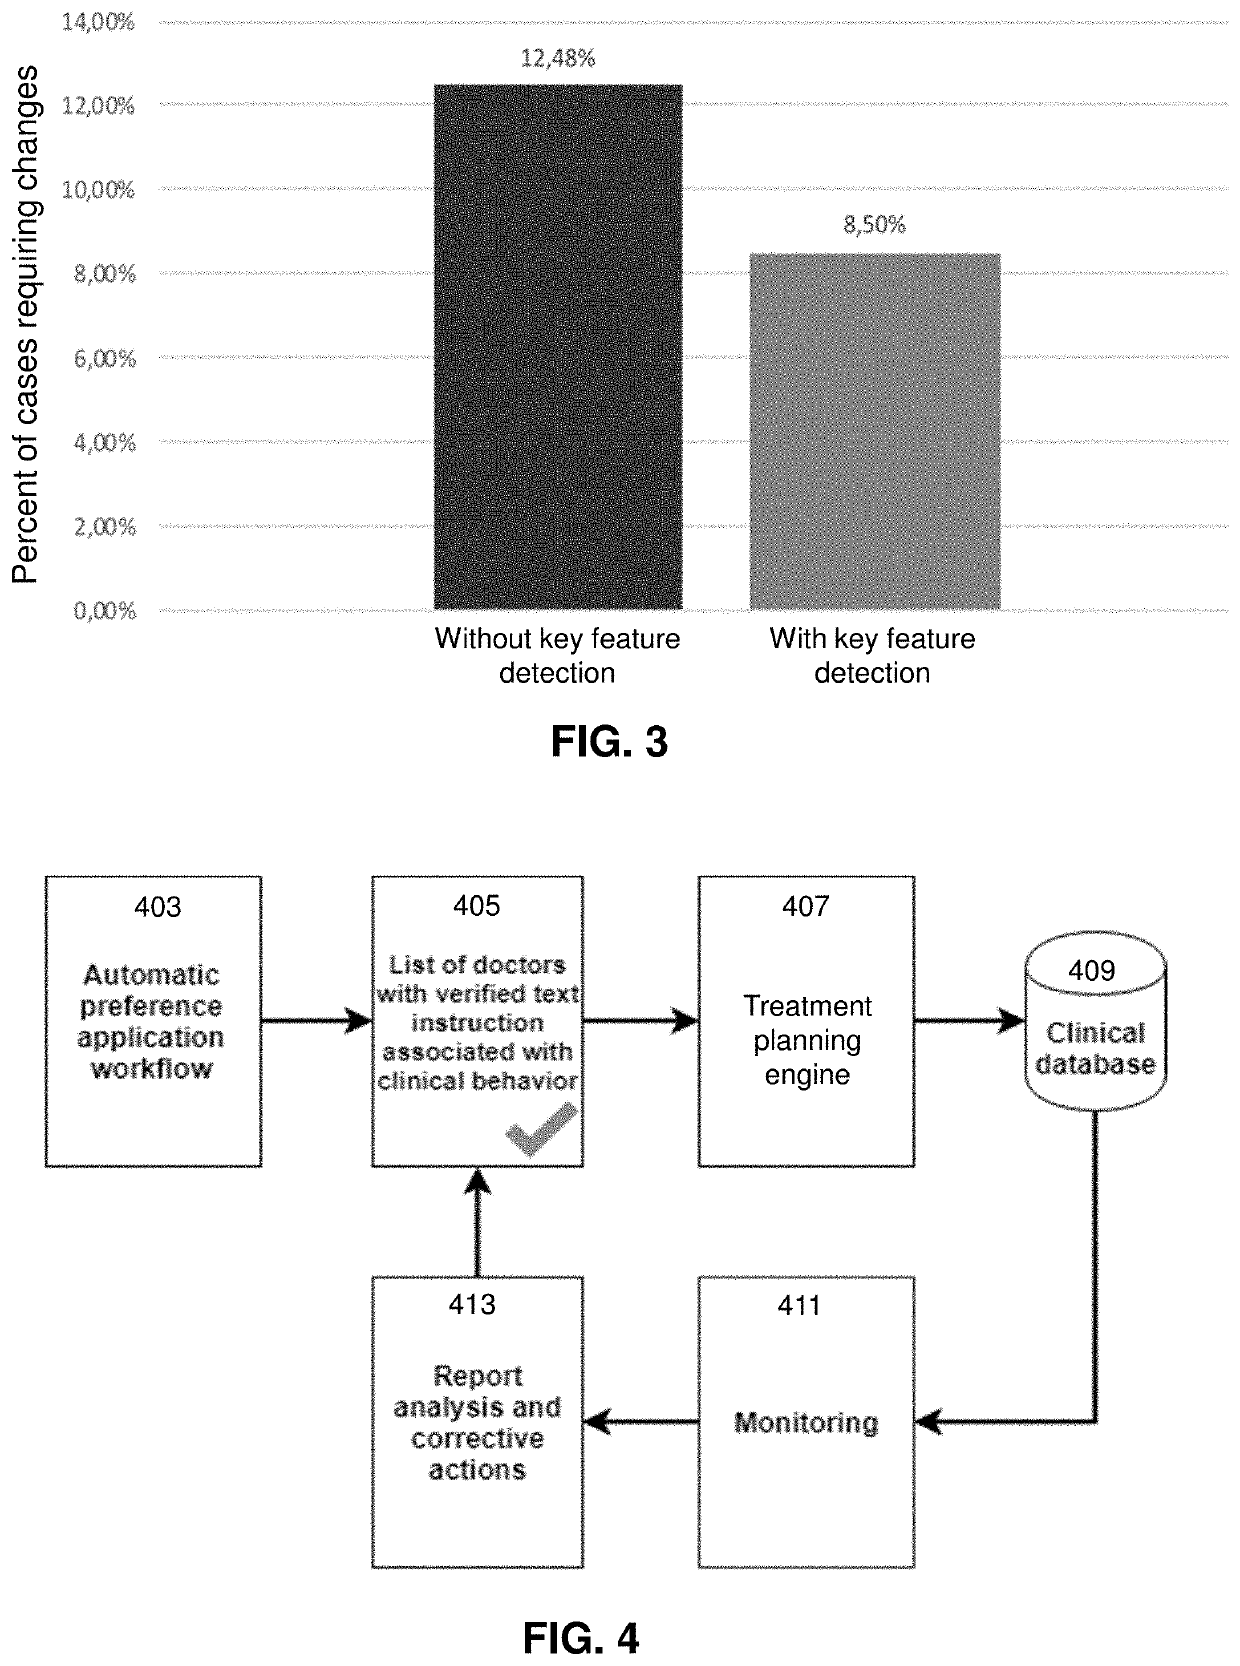 Automatic application of doctor's preferences workflow using statistical preference analysis